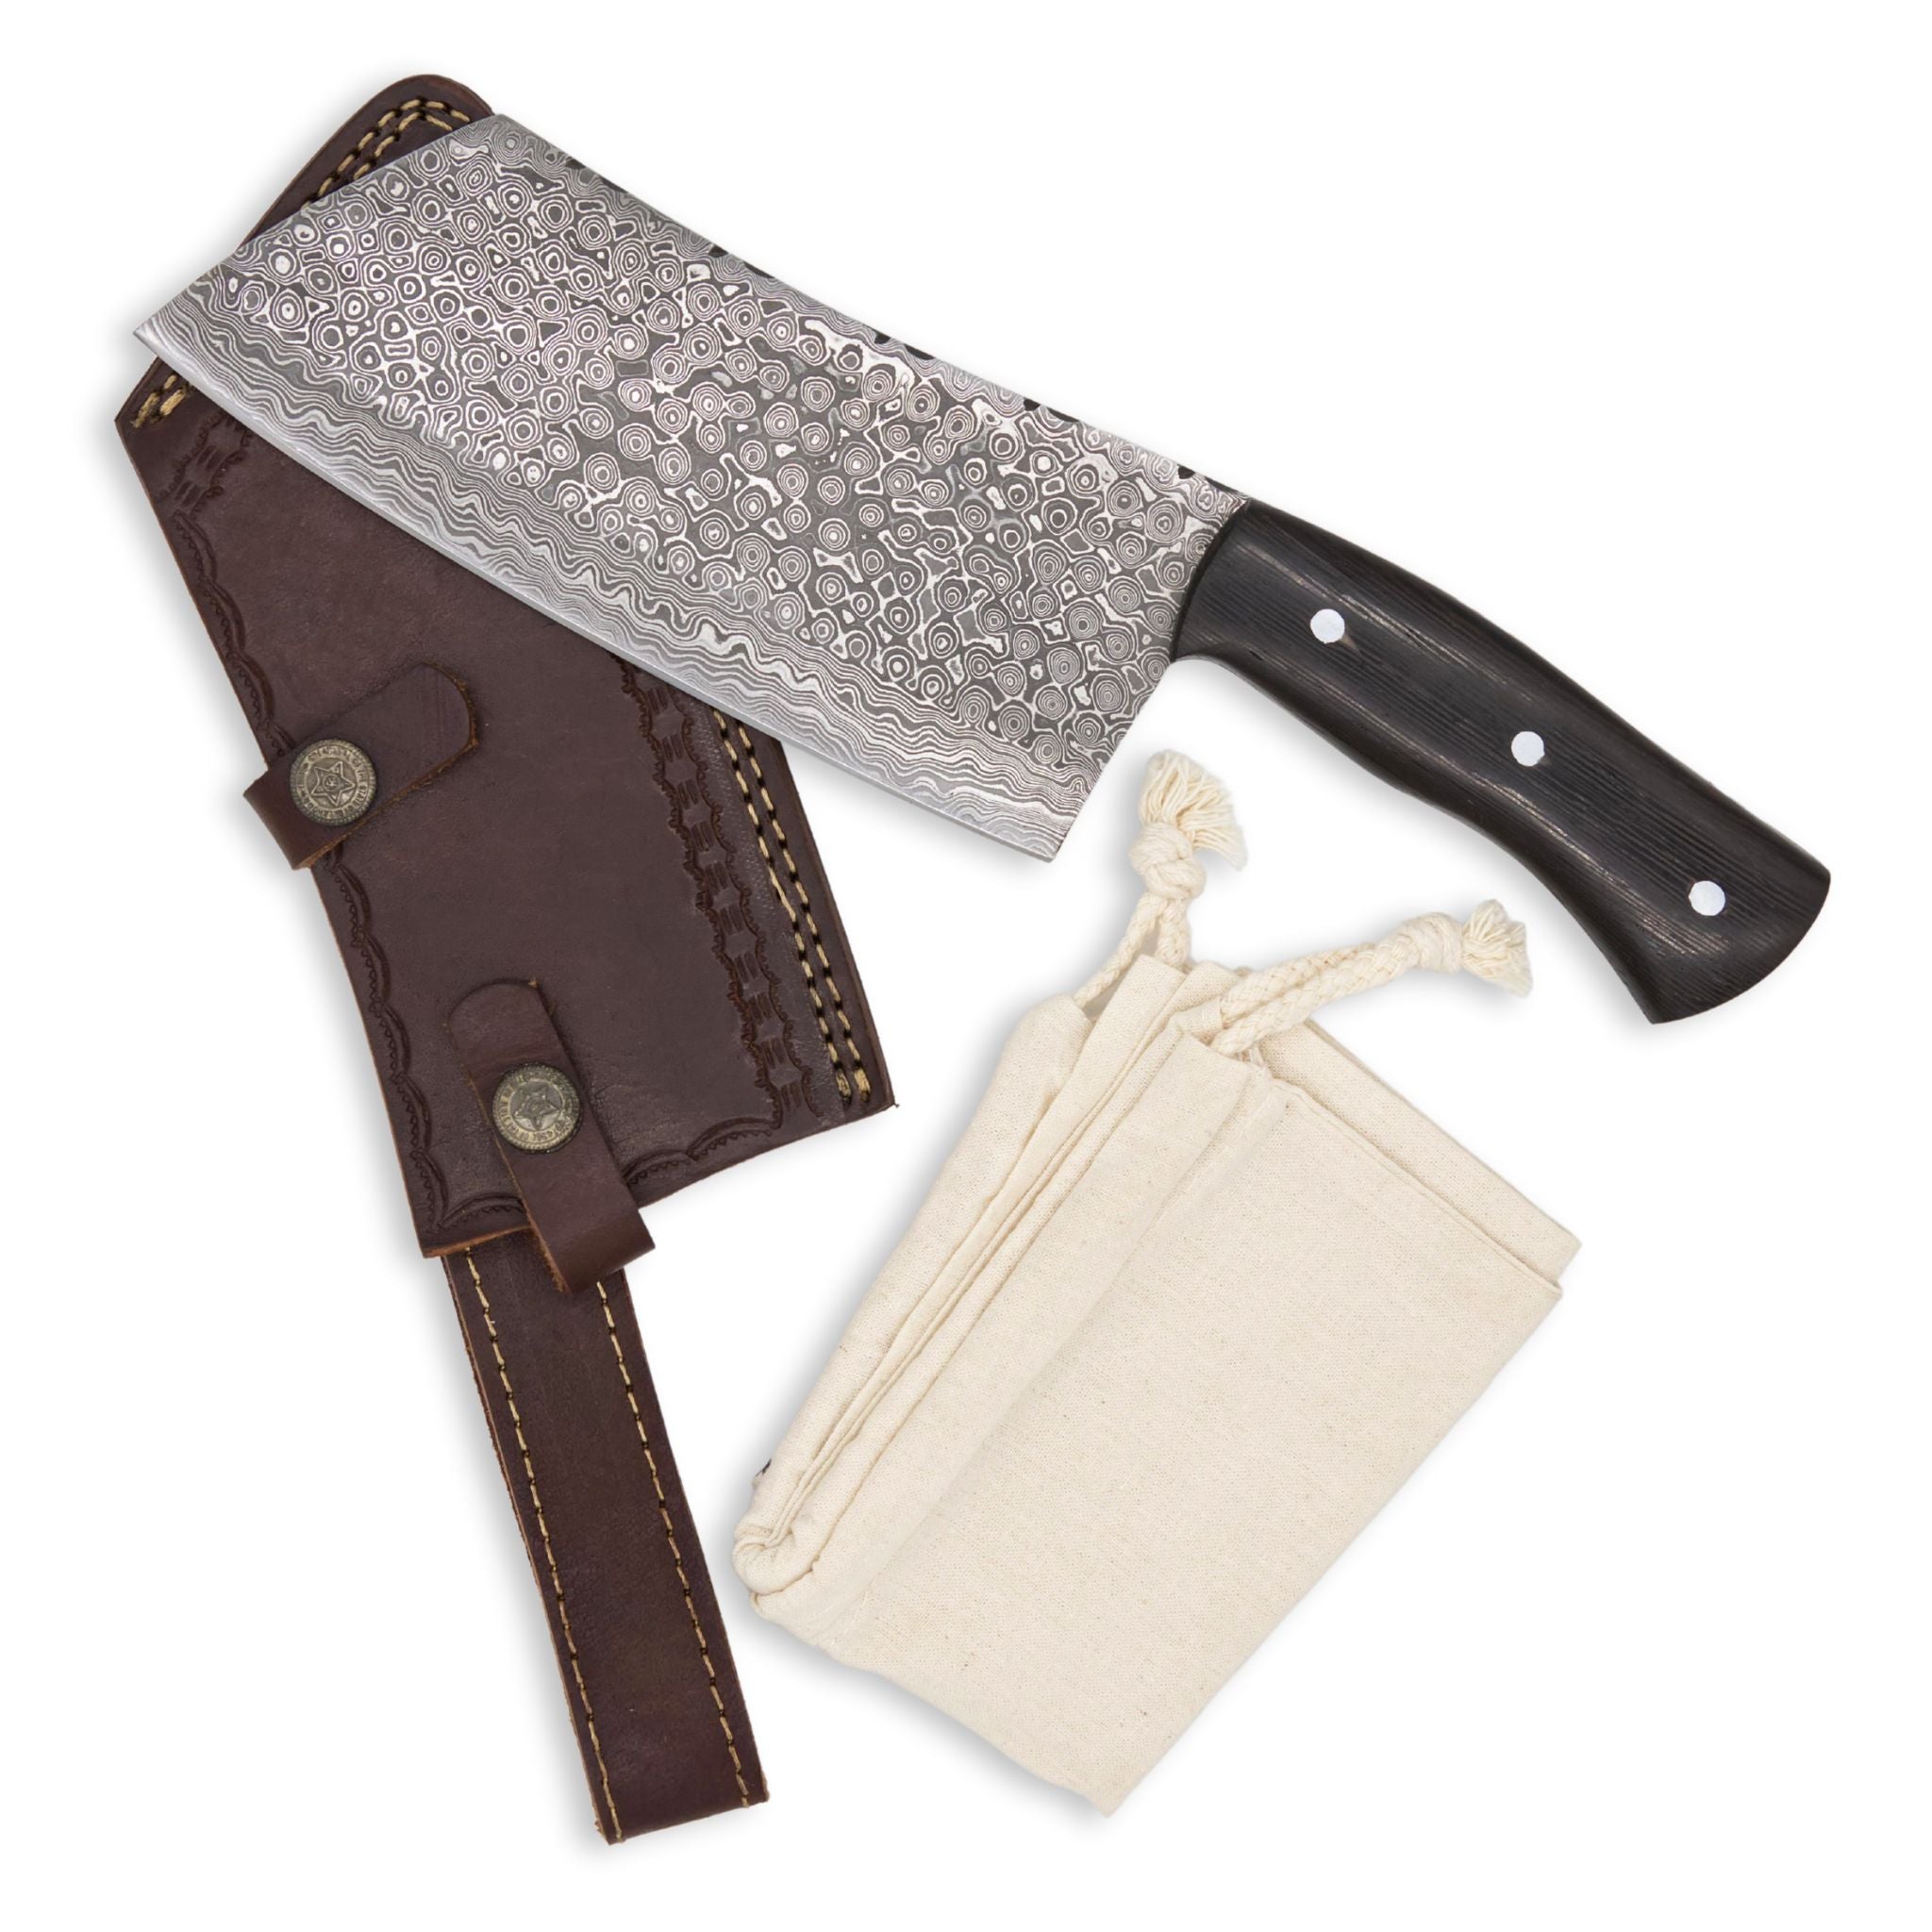 Max Mettle I, Handmade Meat Cleaver